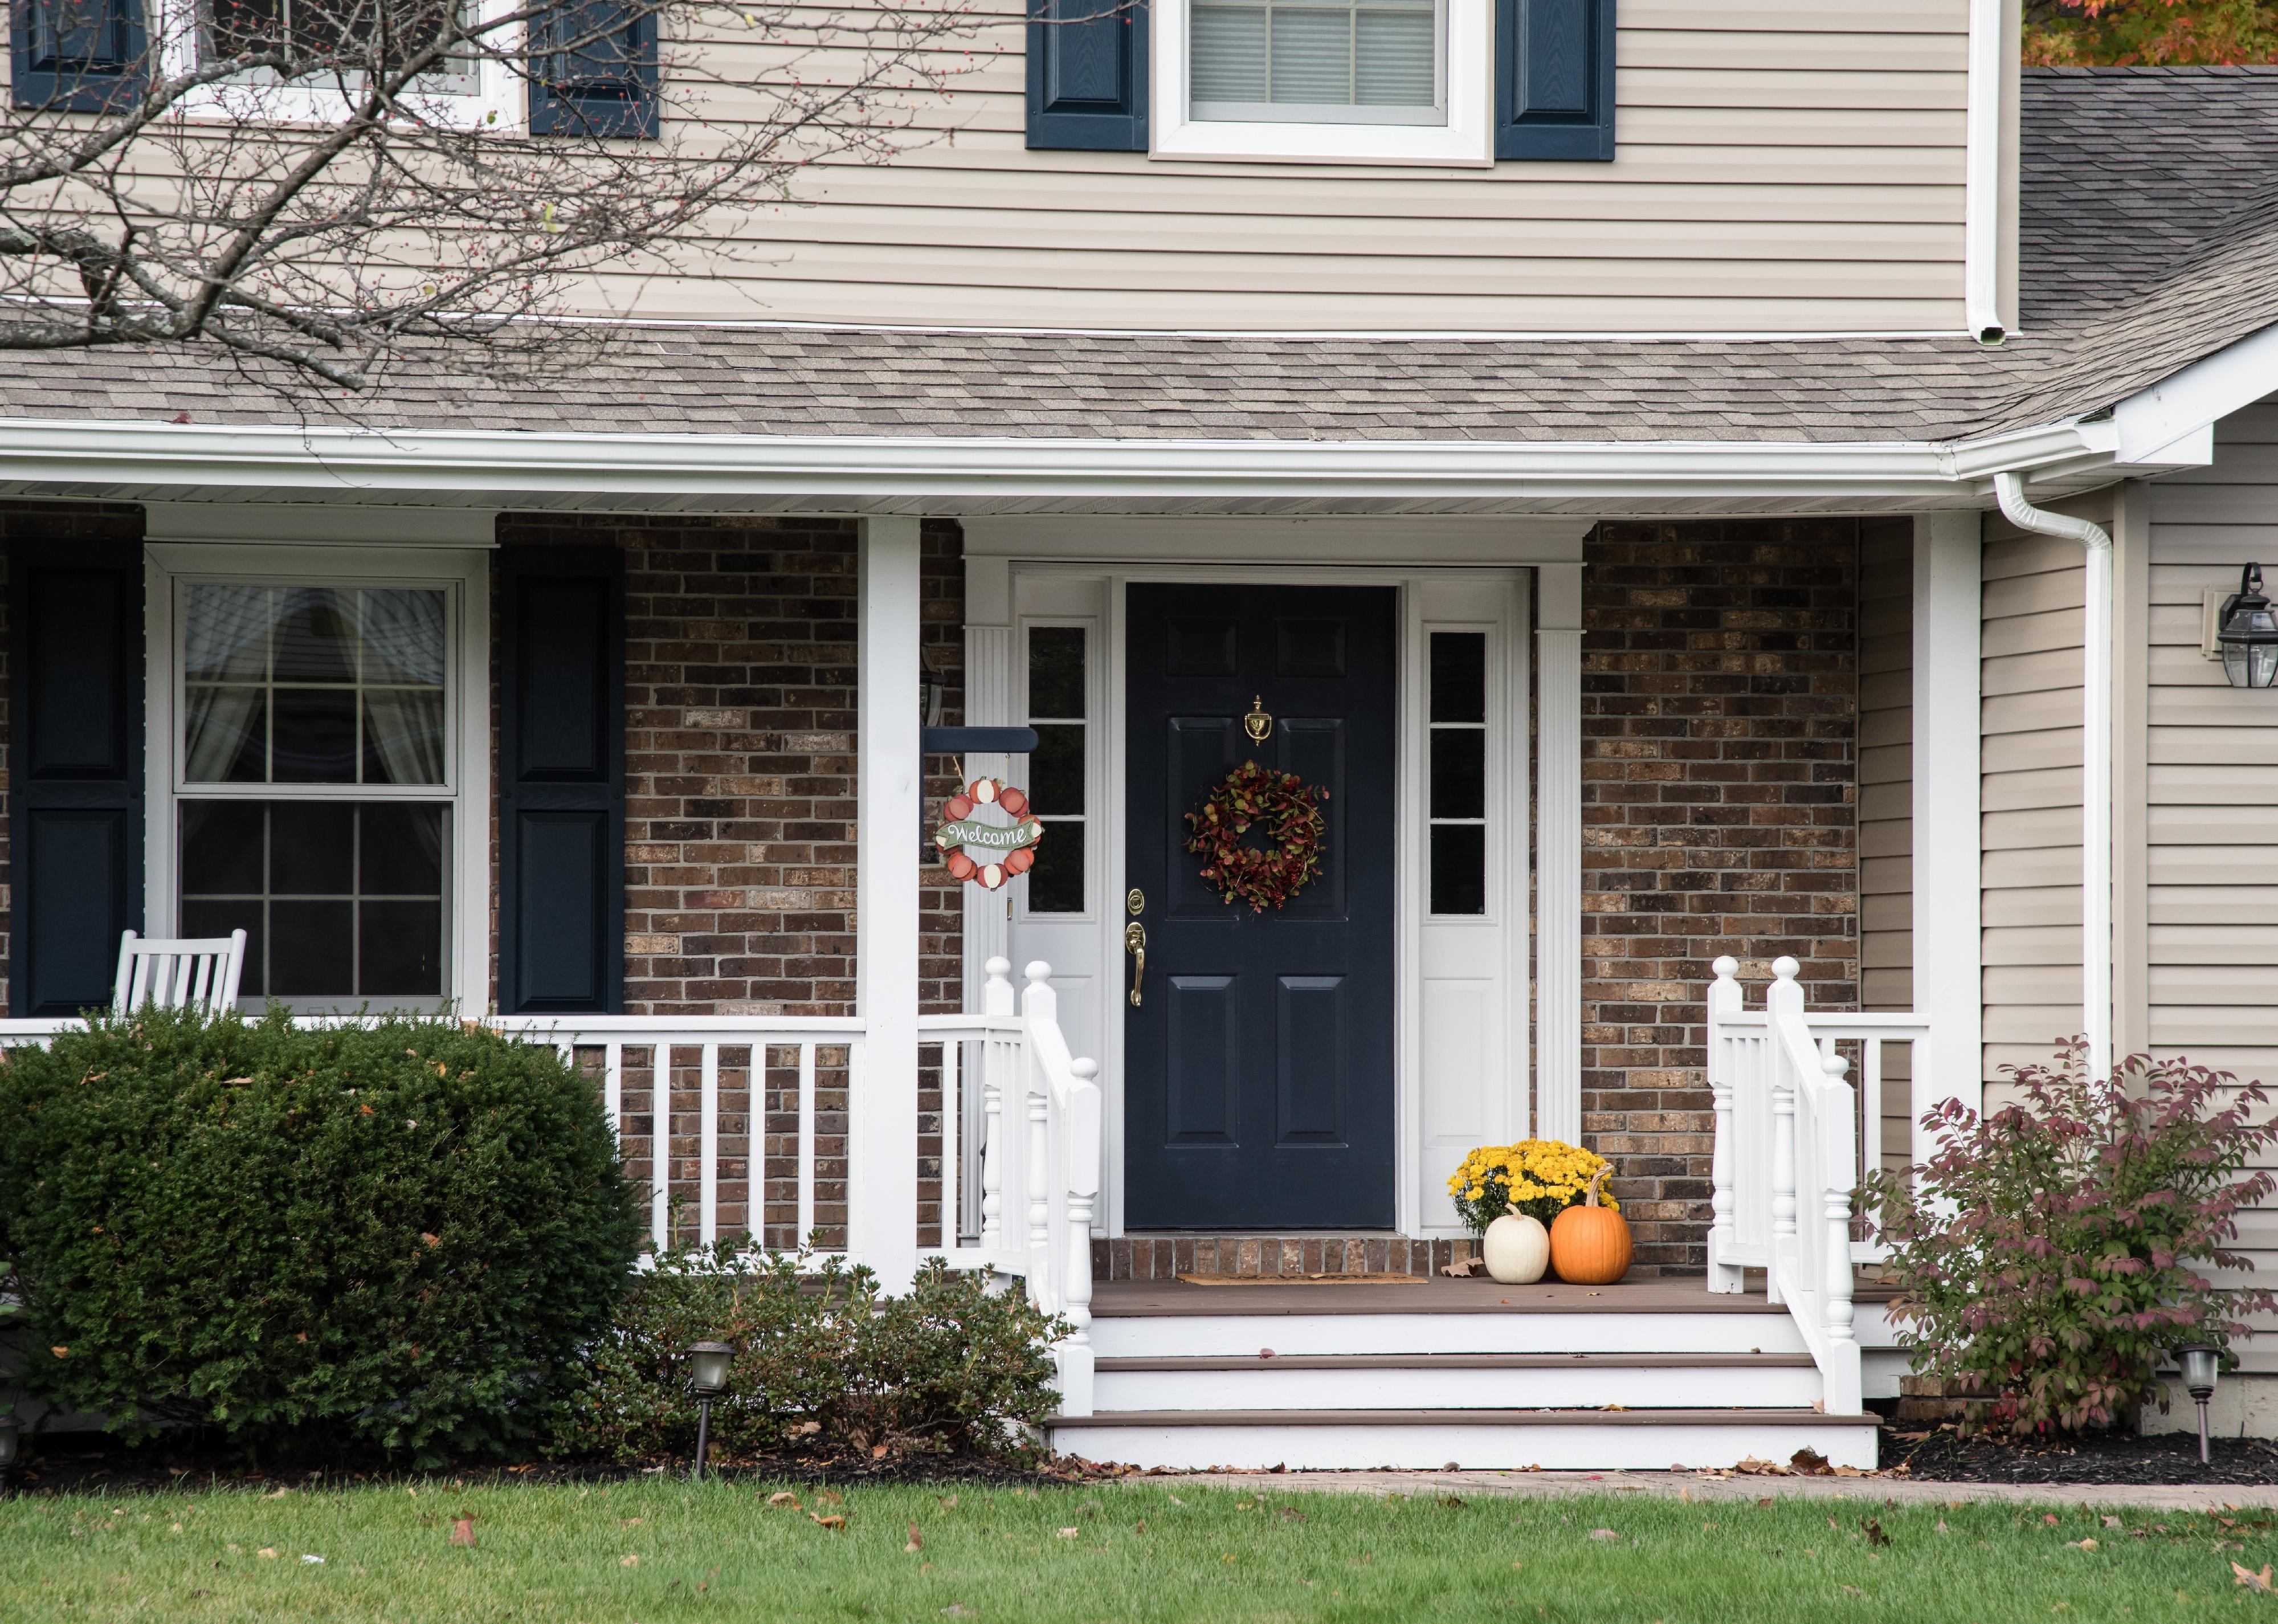 Front porch of suburban home decorated for fall holidays.